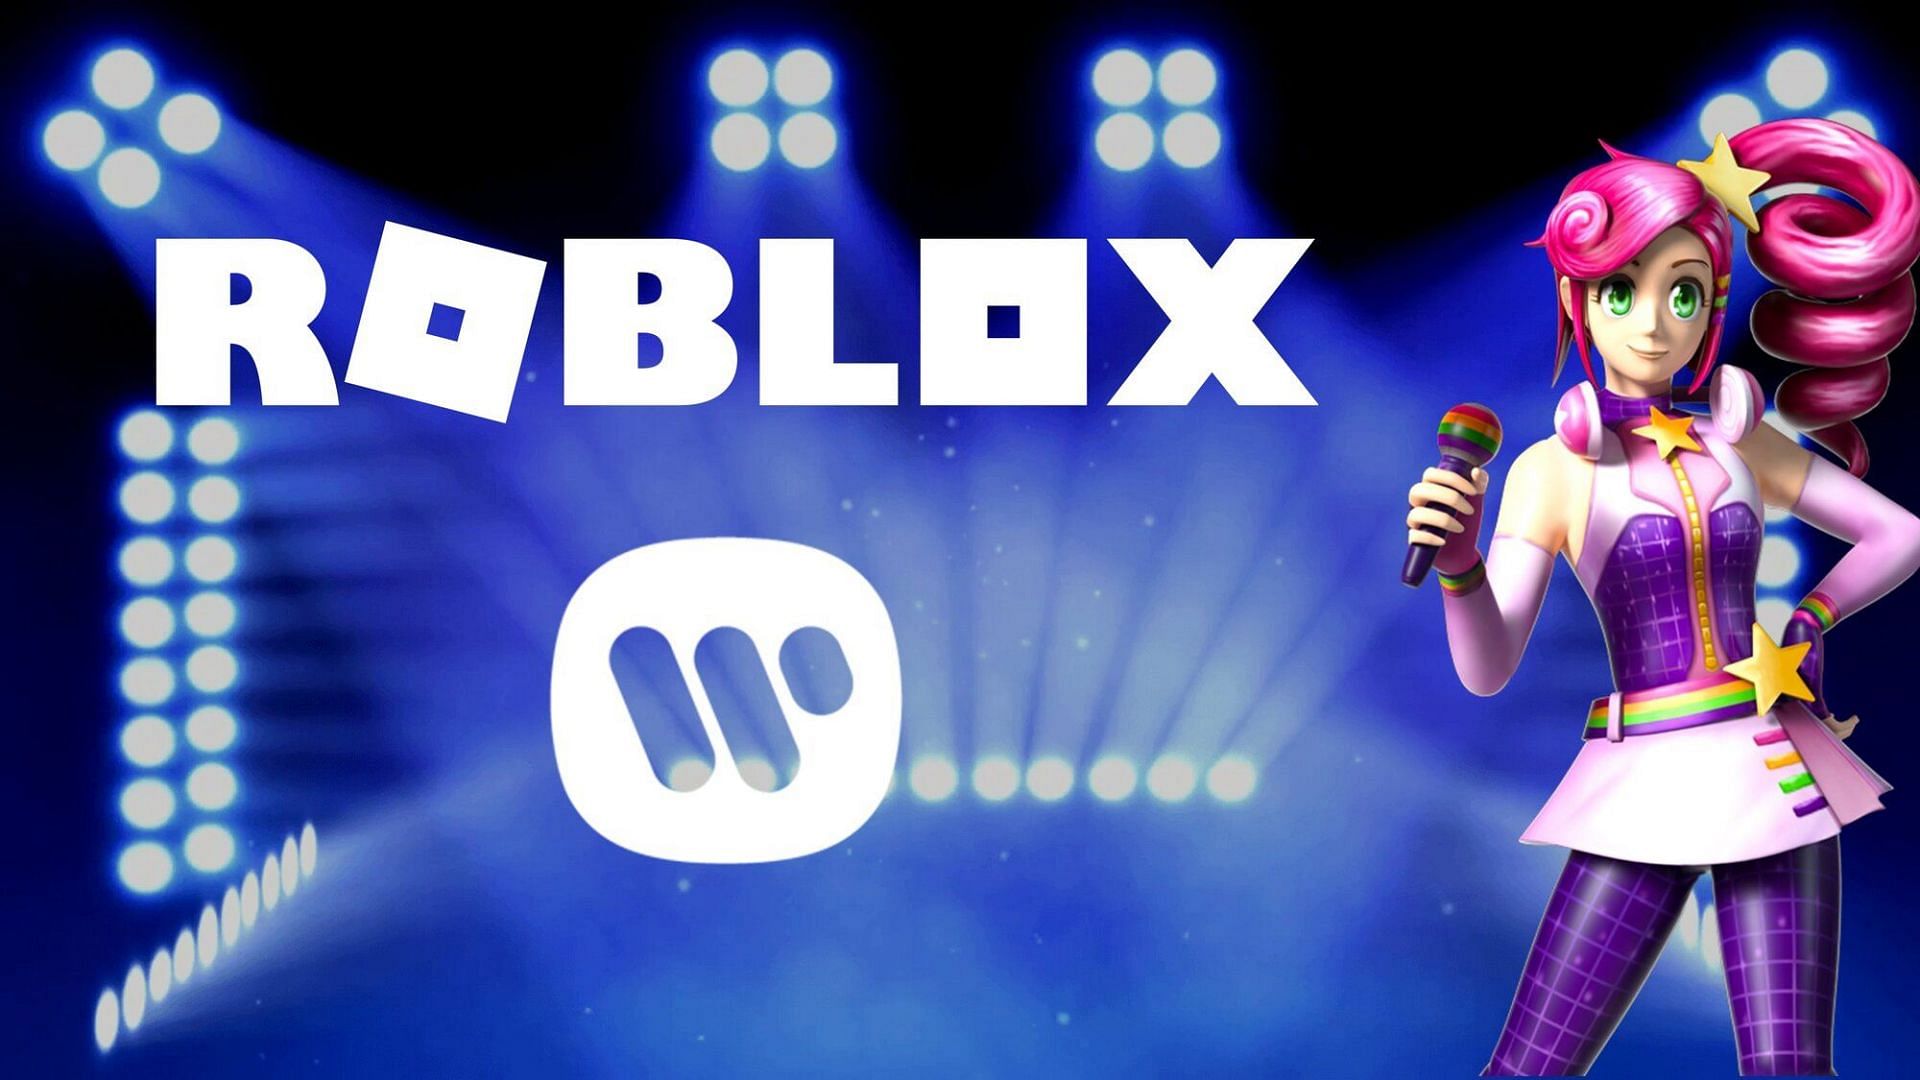 5 biggest artists who have had concerts in Roblox